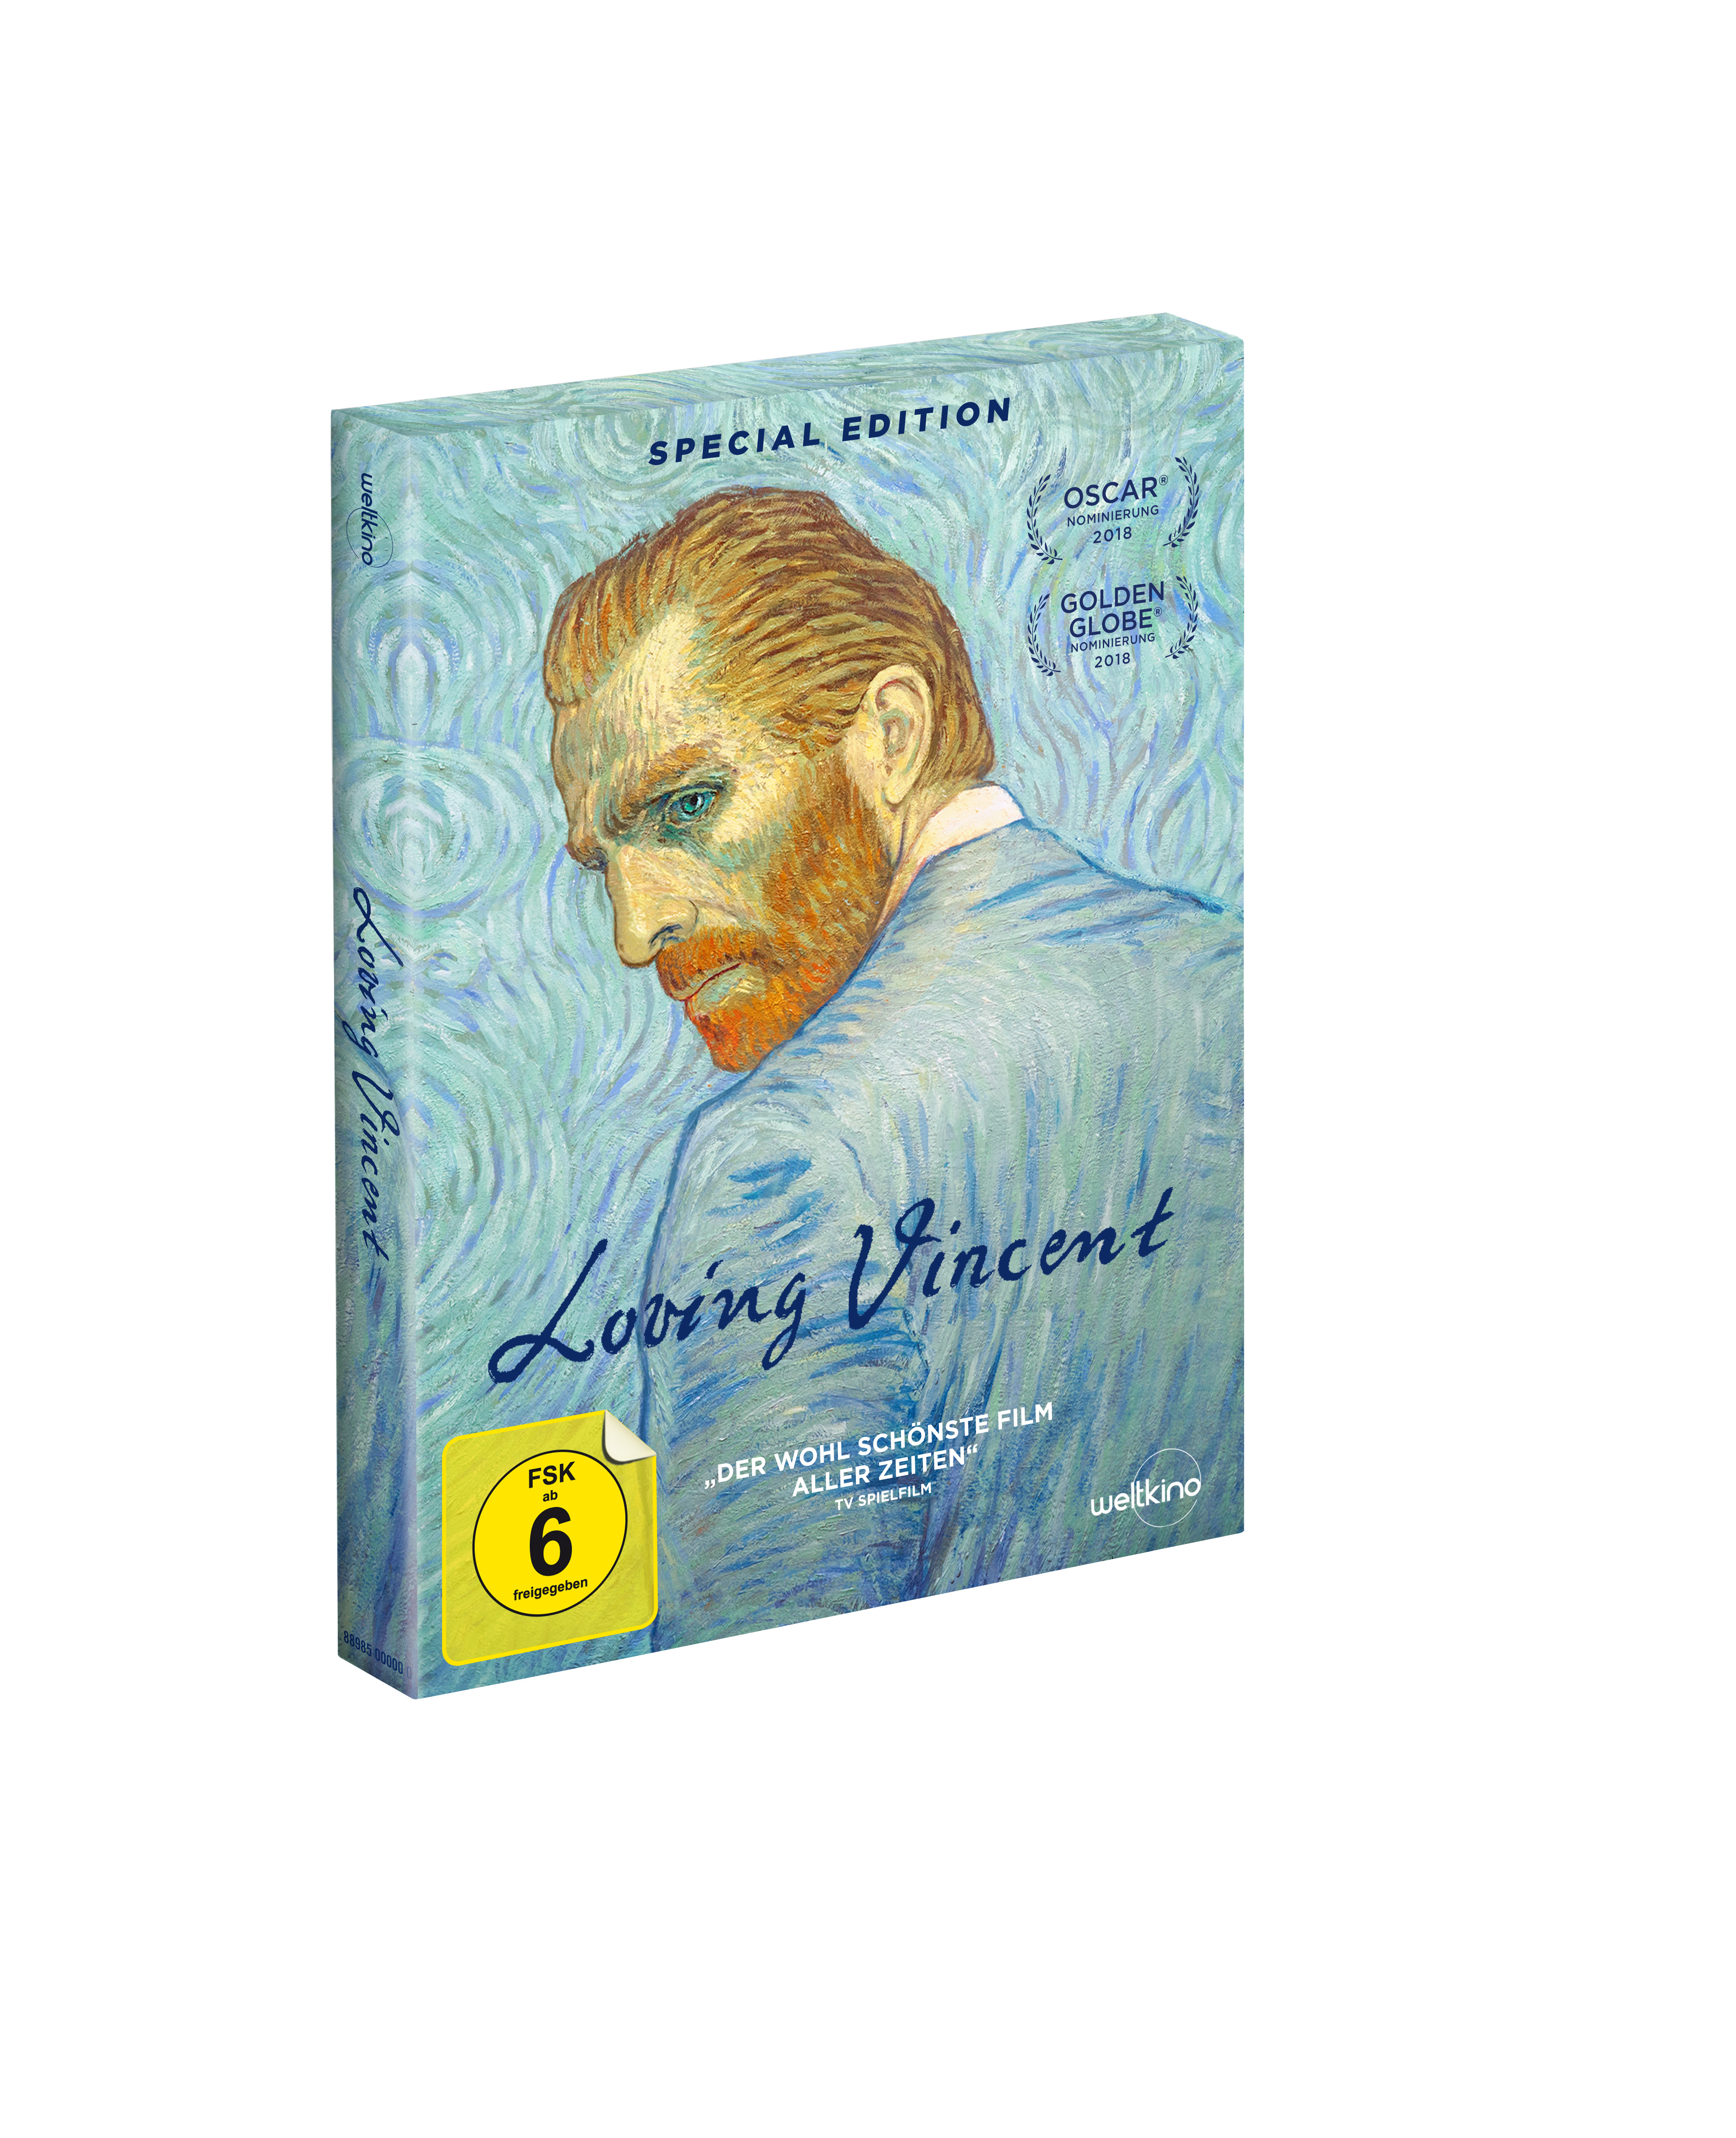 DVD CD (Limited Loving Vincent Special + Edition)